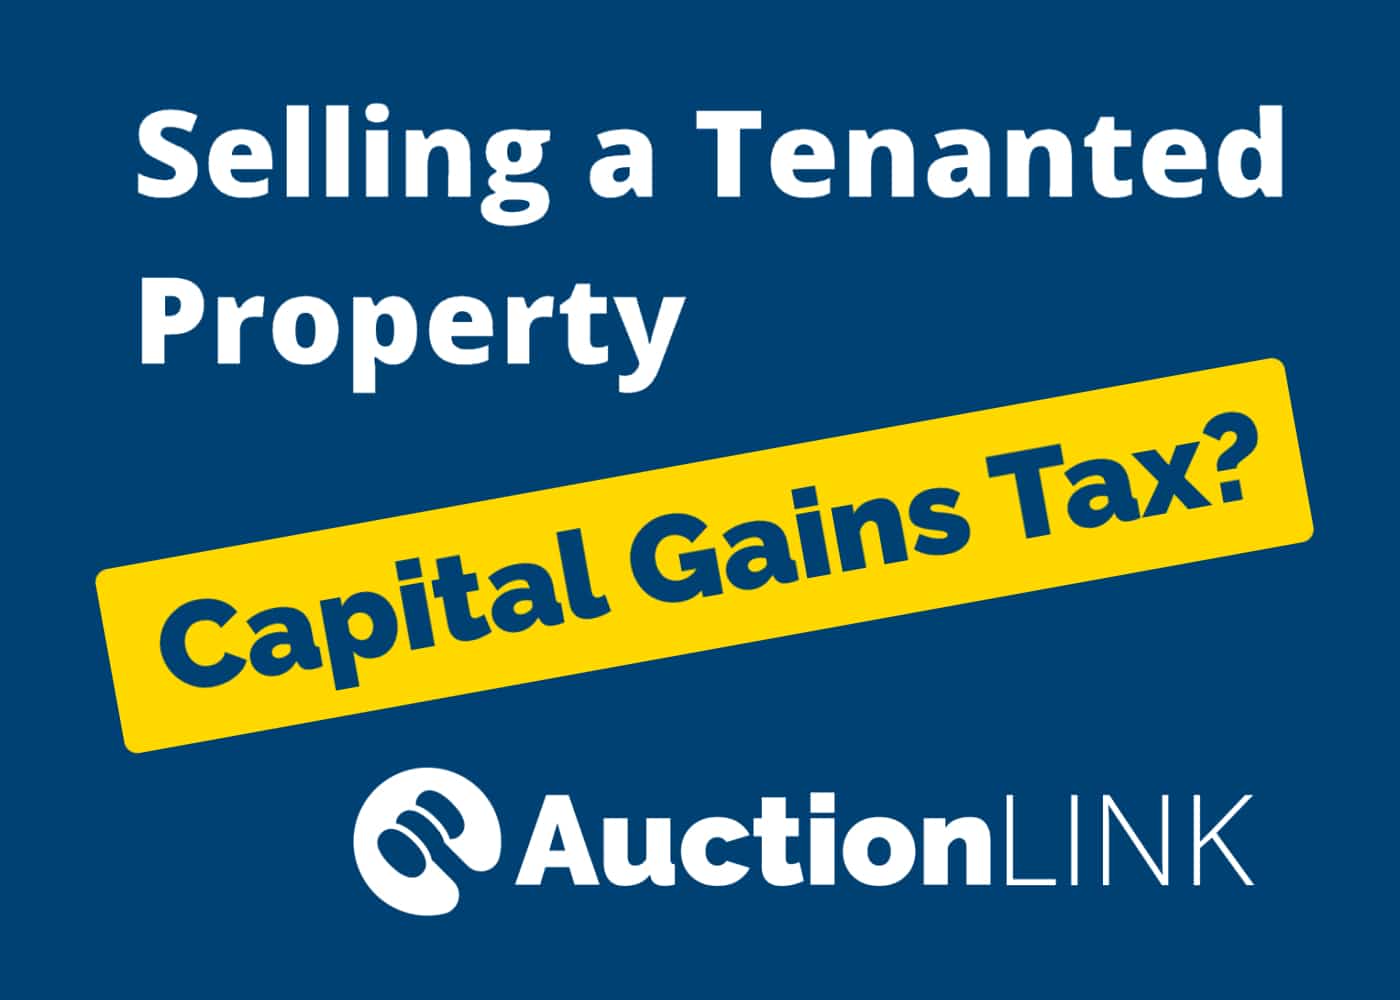 Capital gains tax when selling a tenanted property